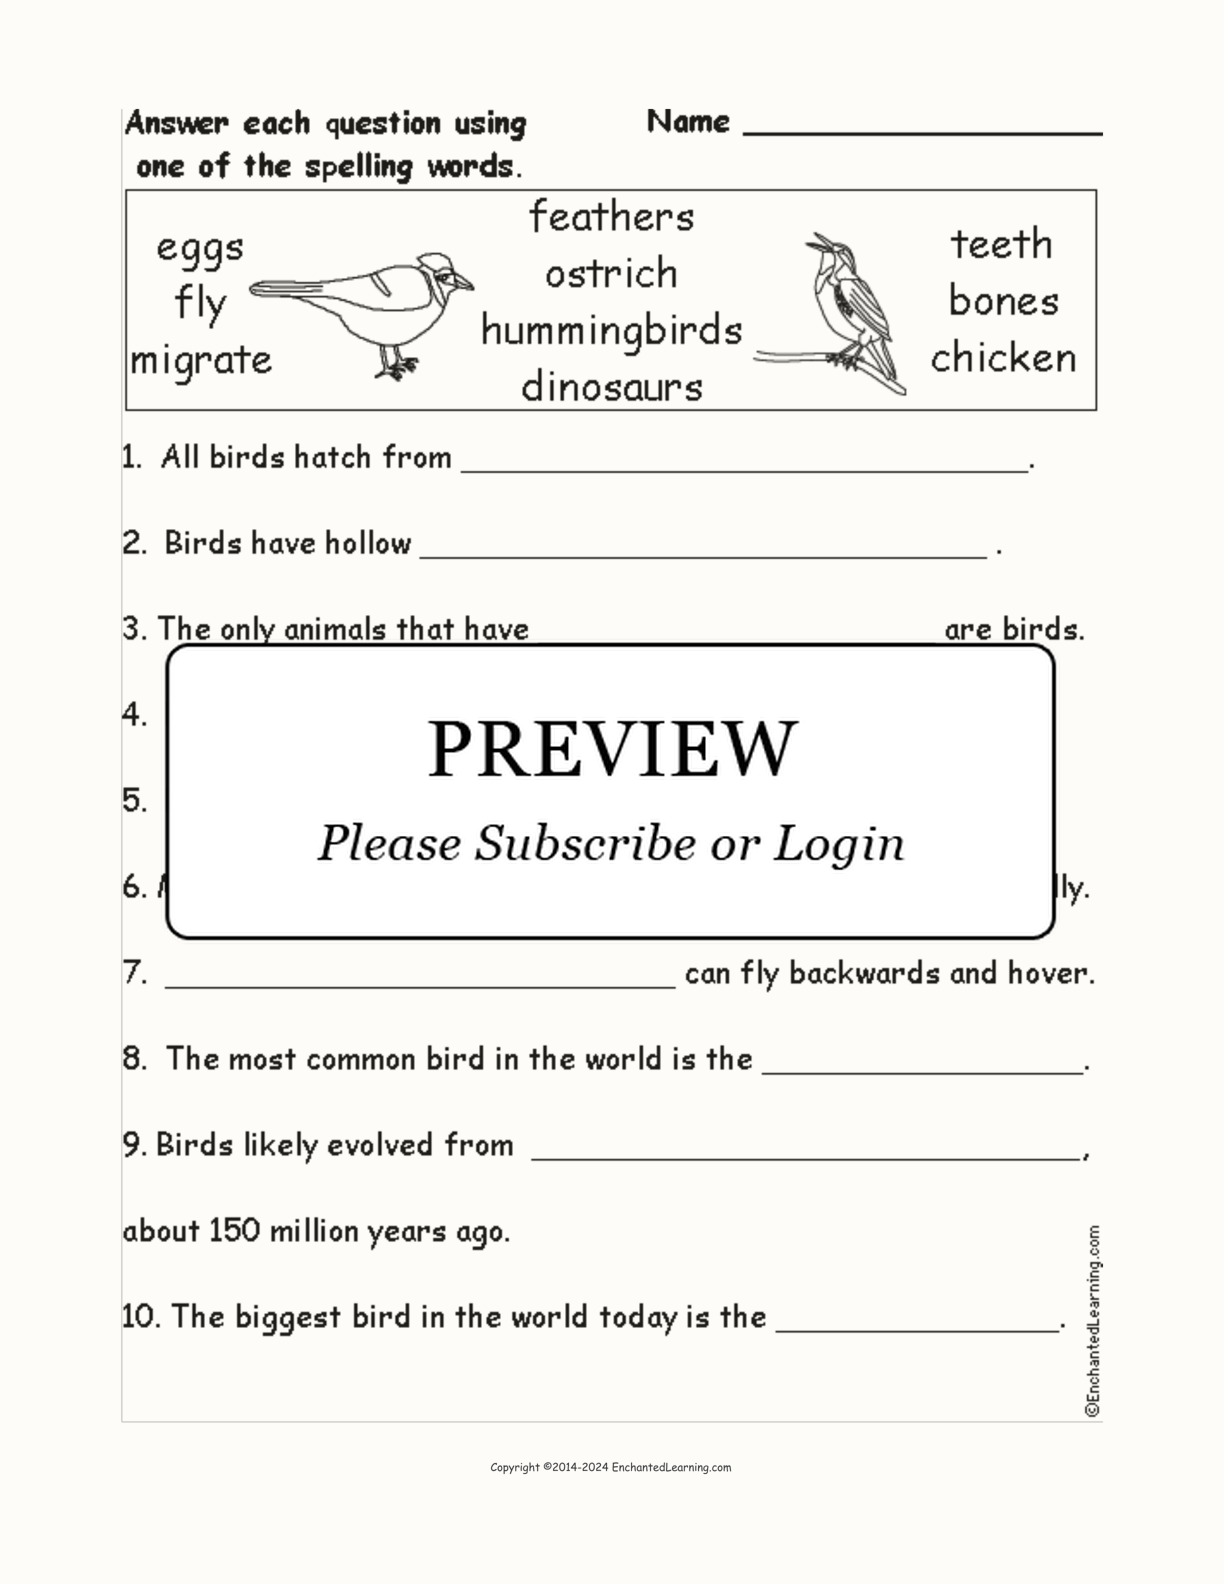 Bird Spelling Word Questions interactive worksheet page 1